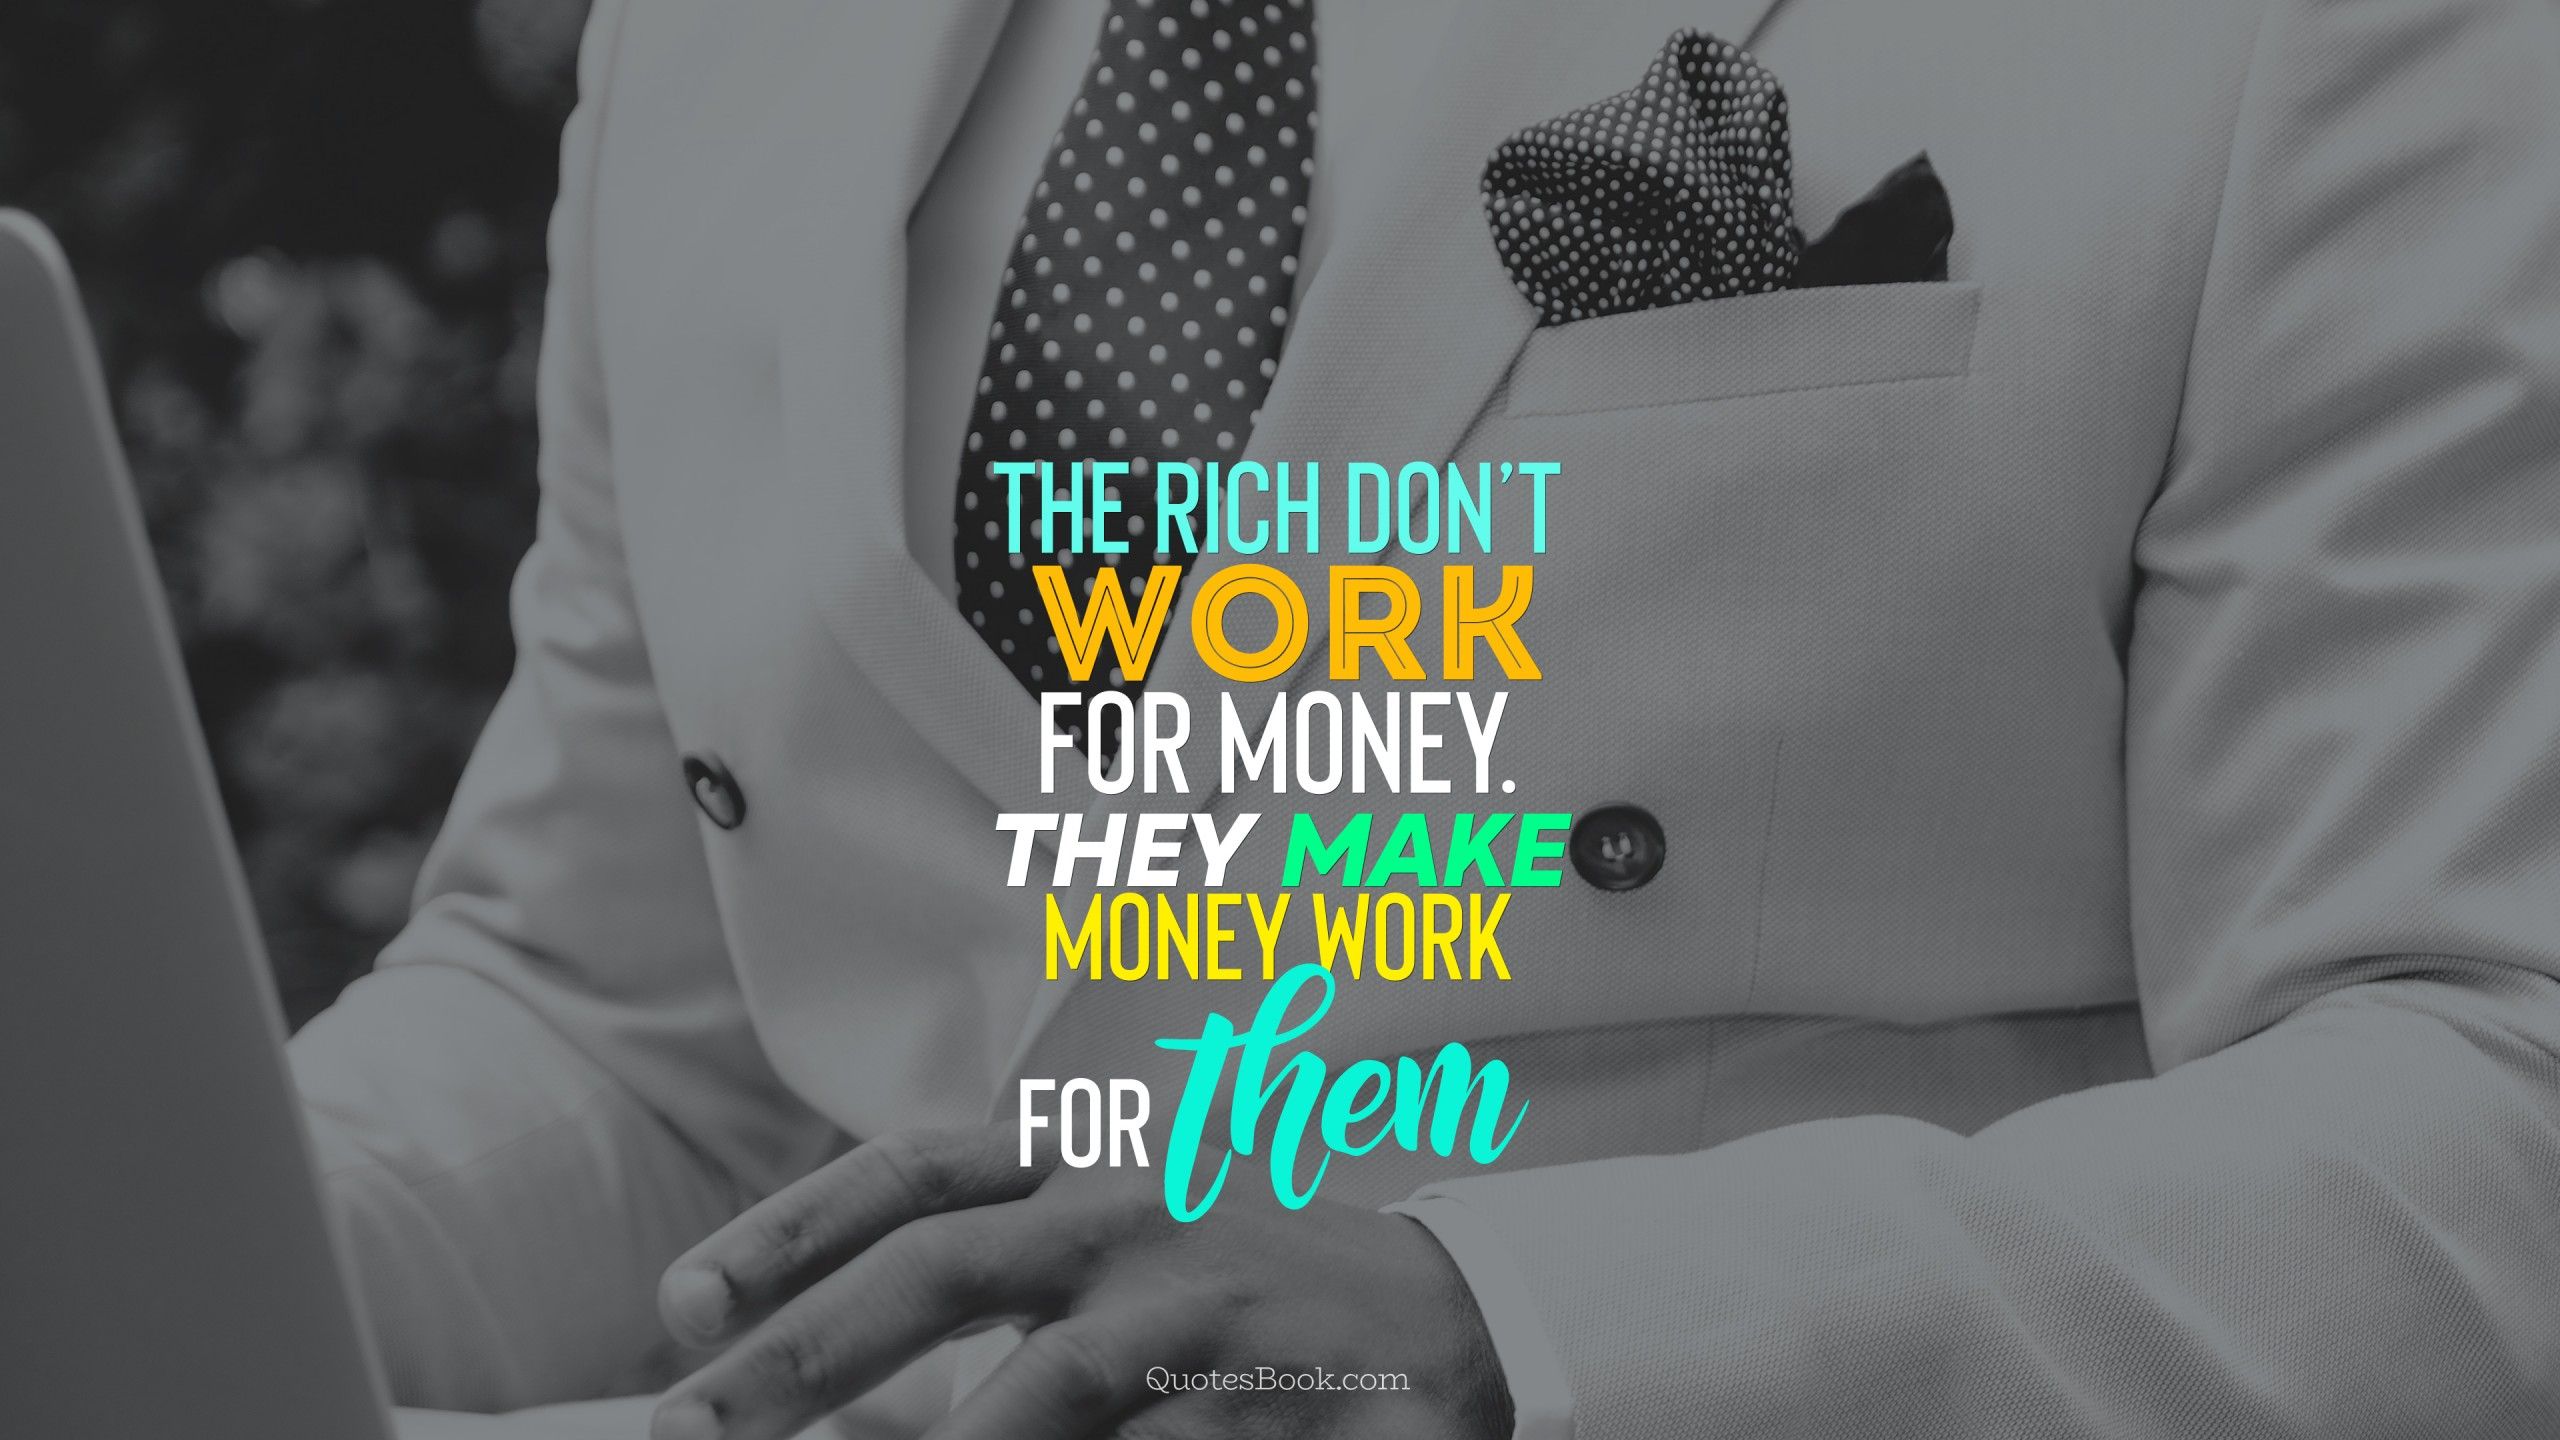 Millionaire Quotes Wallpapers - Wallpaper Cave